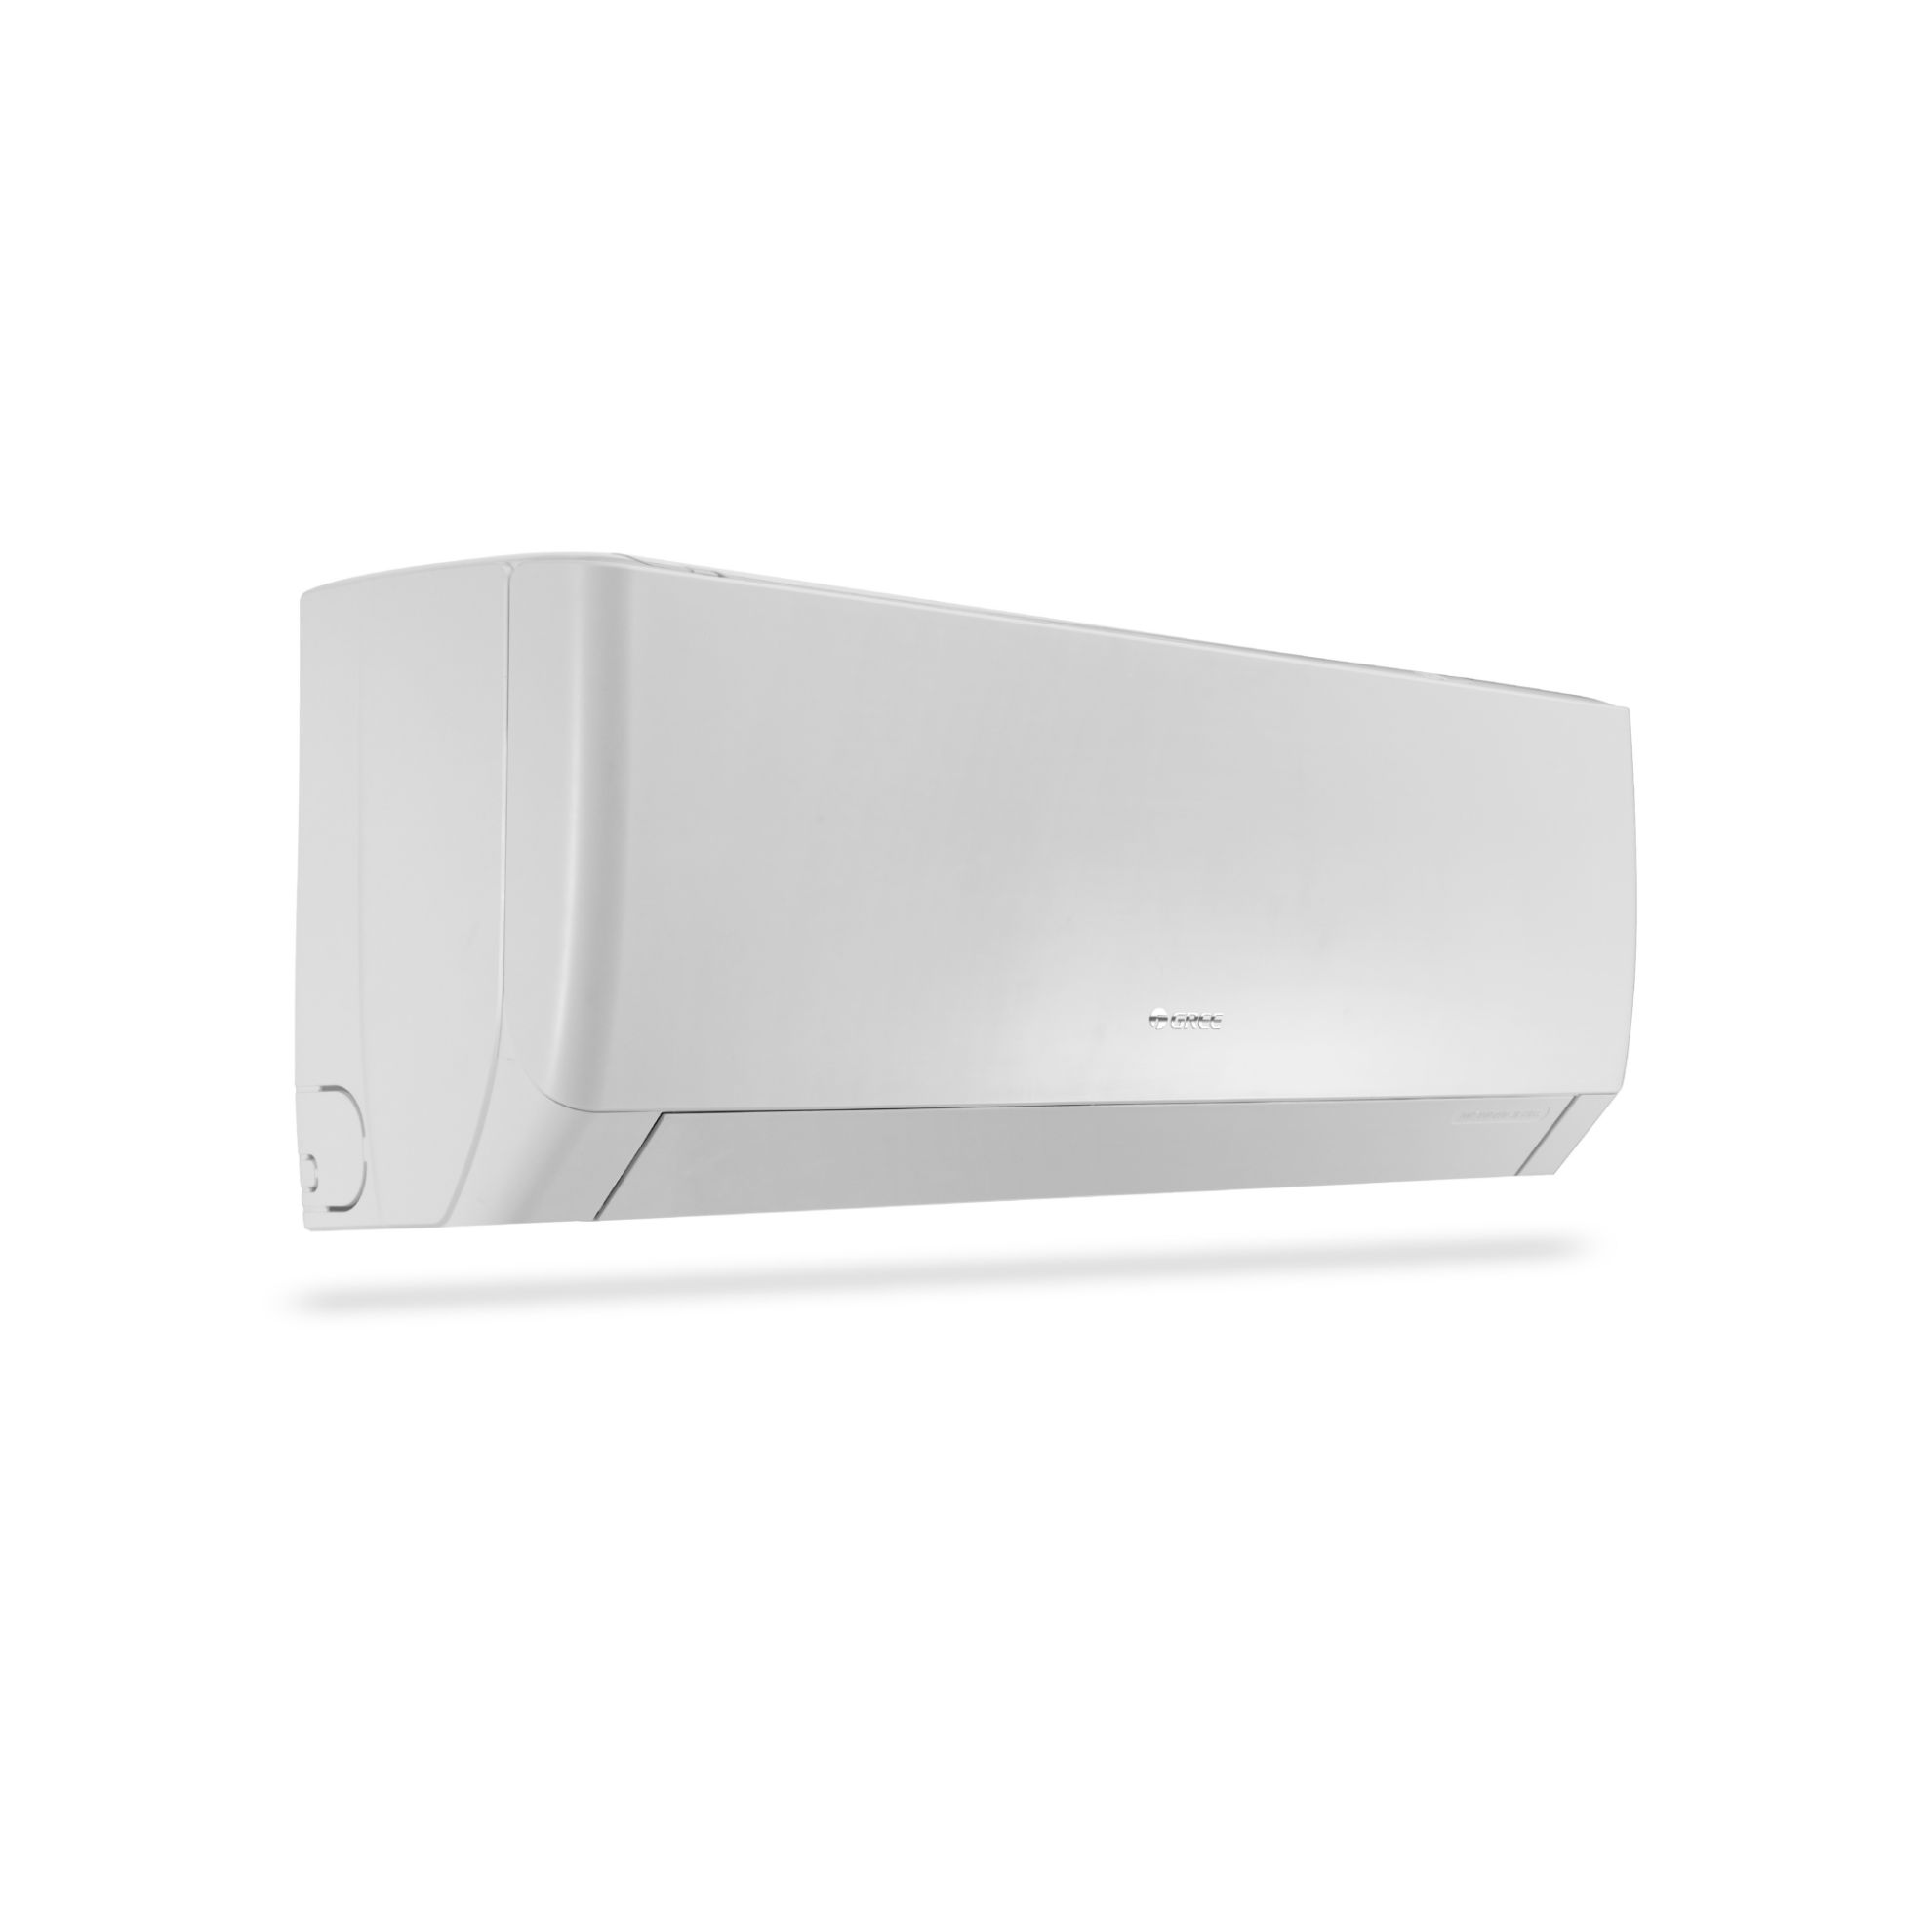 Picture of Gree - P4matic-P12C3 - 1 Ton|Rotary|Wall Split AC